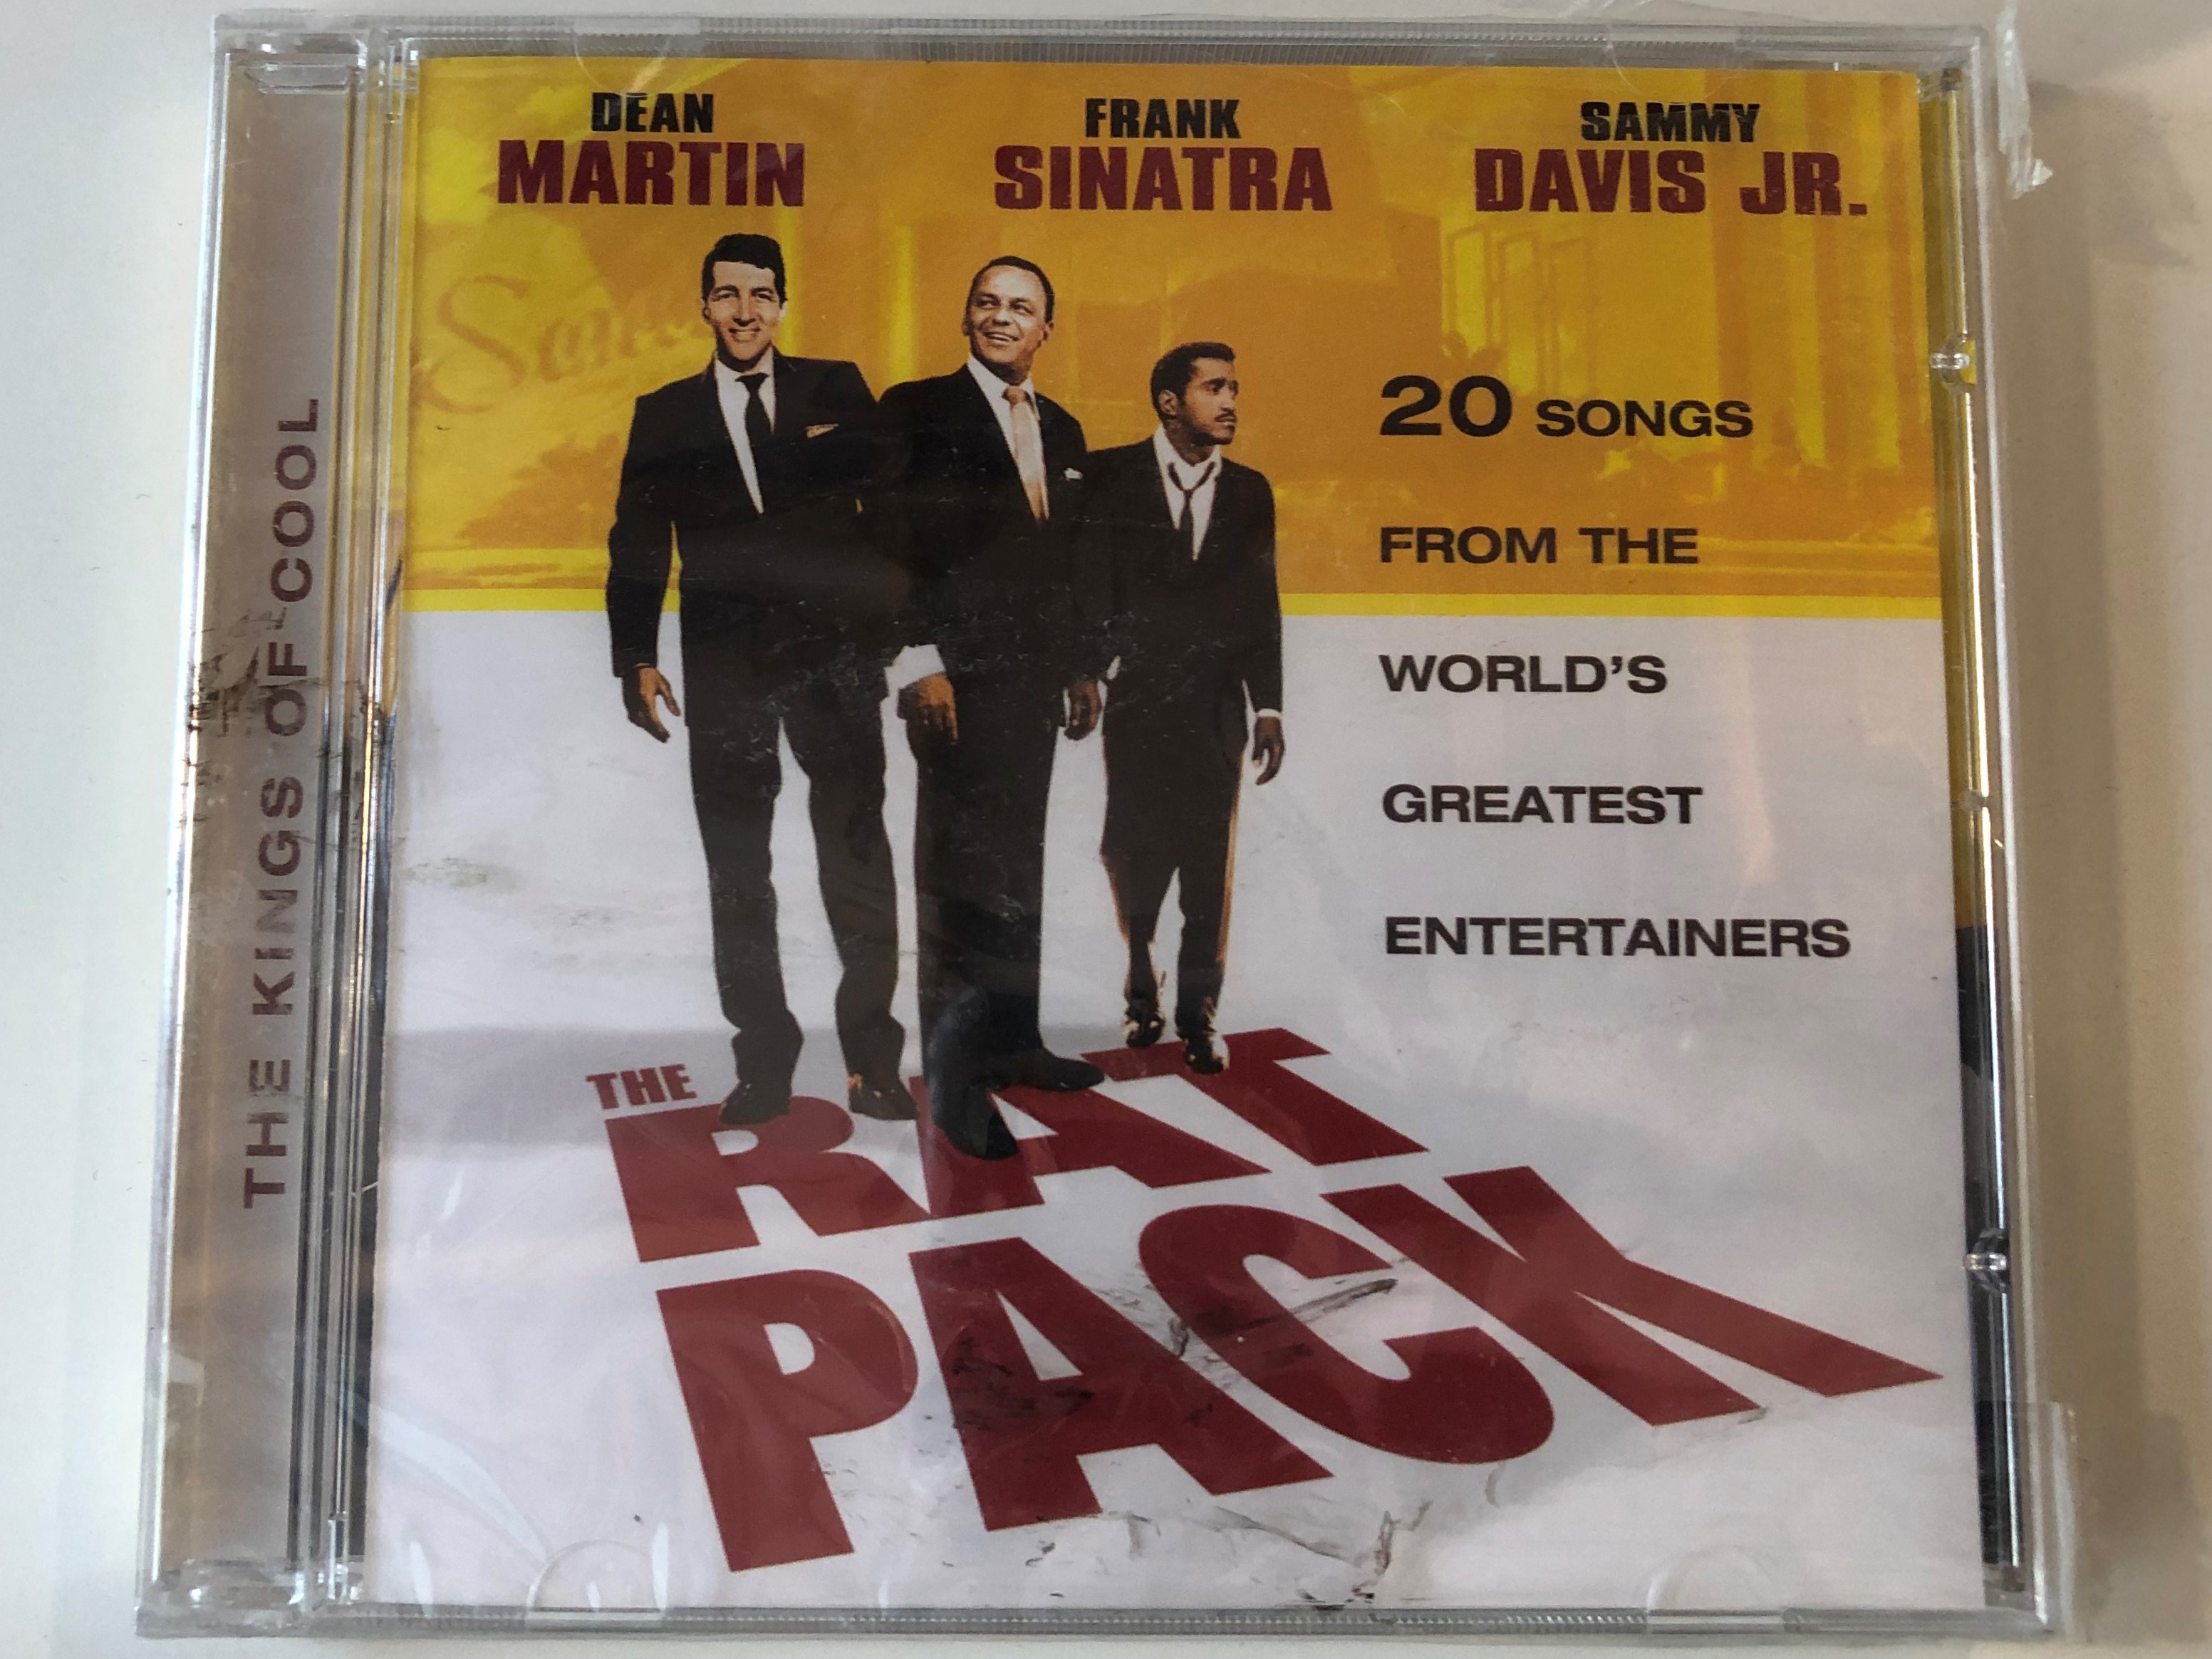 dean-martin-frank-sinatra-sammy-davis-jr.-the-rat-pack-20-songs-from-the-world-s-greatest-entertainers-the-kings-of-cool-prism-leisure-audio-cd-2003-platcd-987-1-.jpg